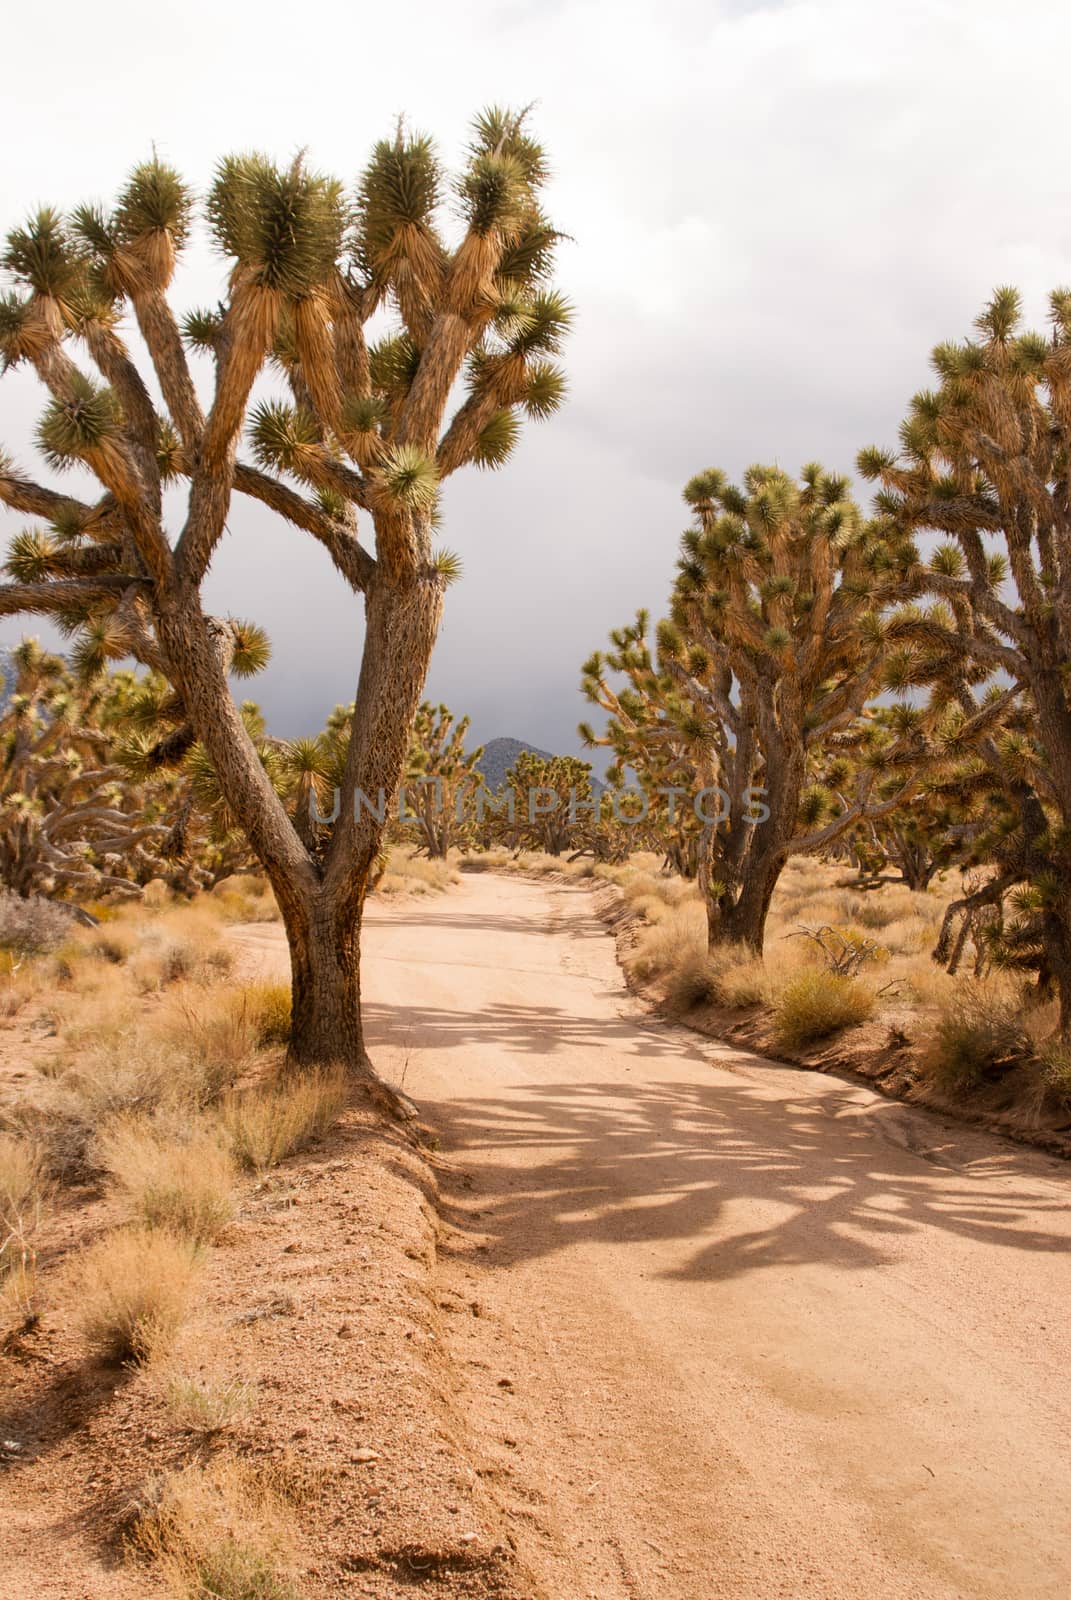 Joshua tree forest on stormy day by emattil